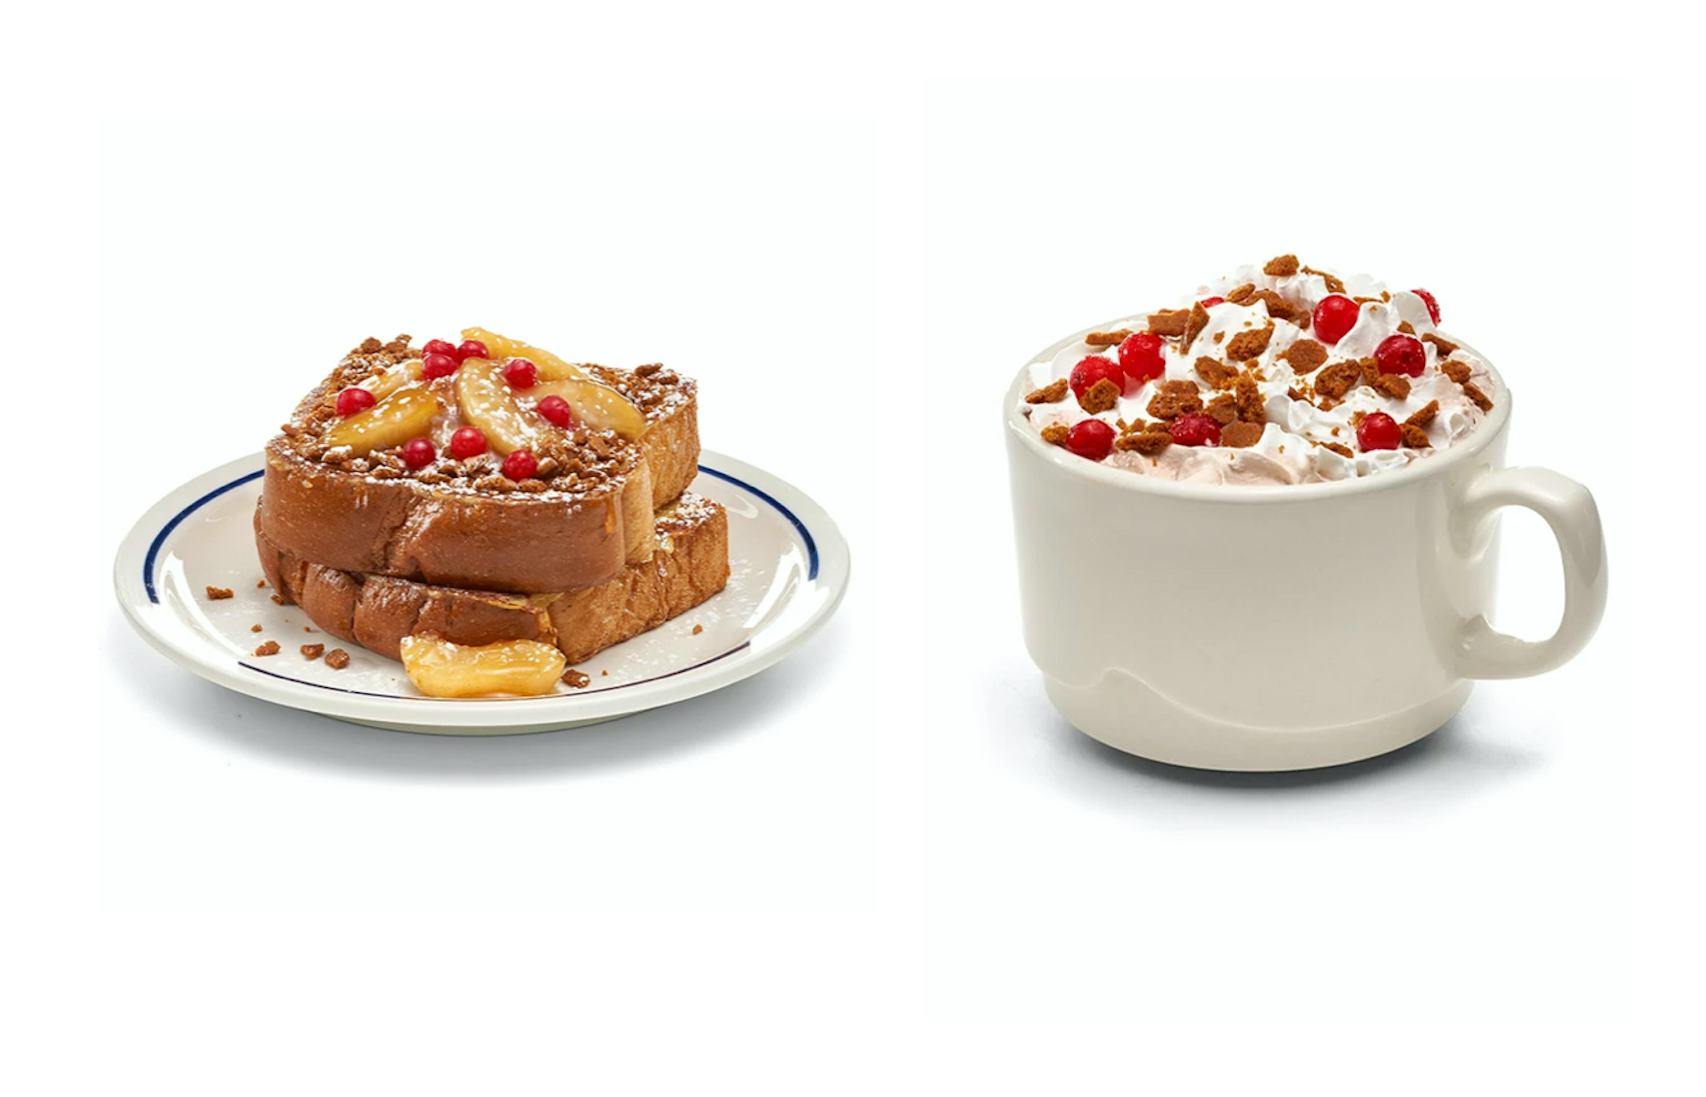 IHOP Announces Their New Holiday Menu